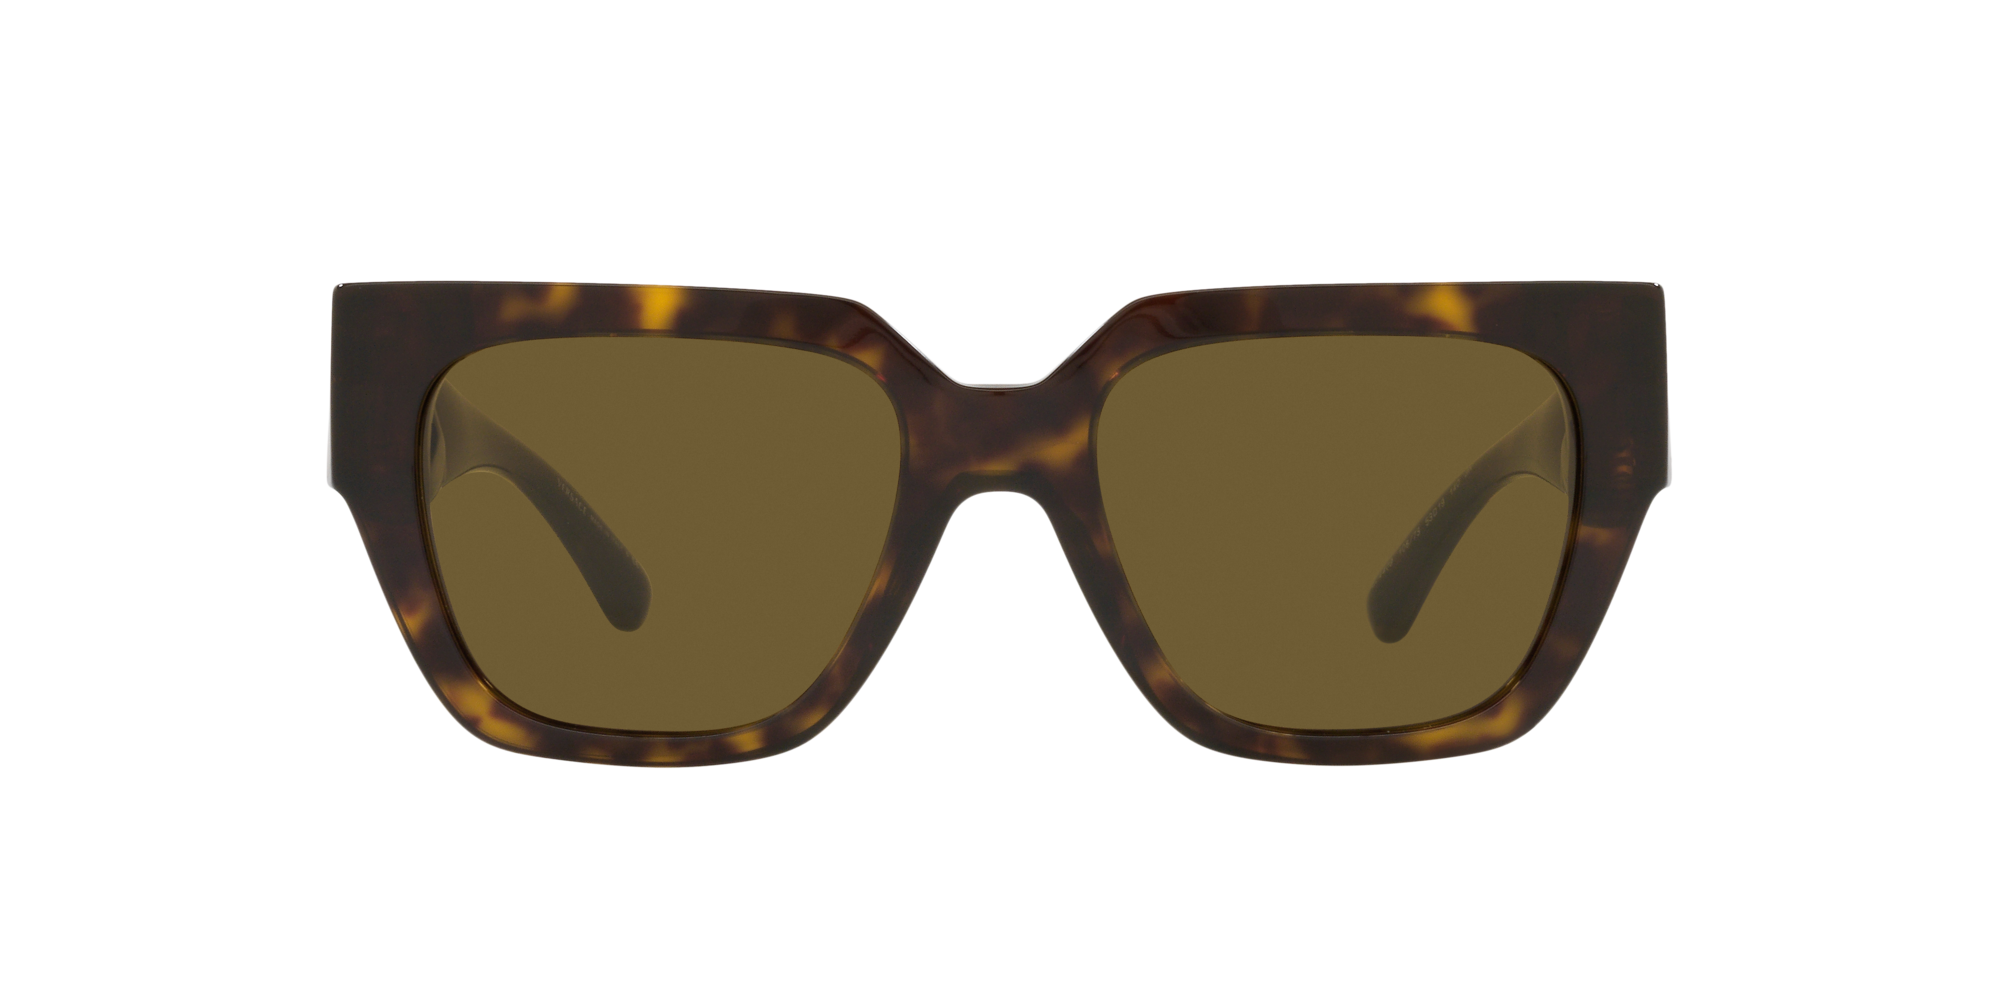 [products.image.front] Versace 0VE4409 108/73 Sonnenbrille